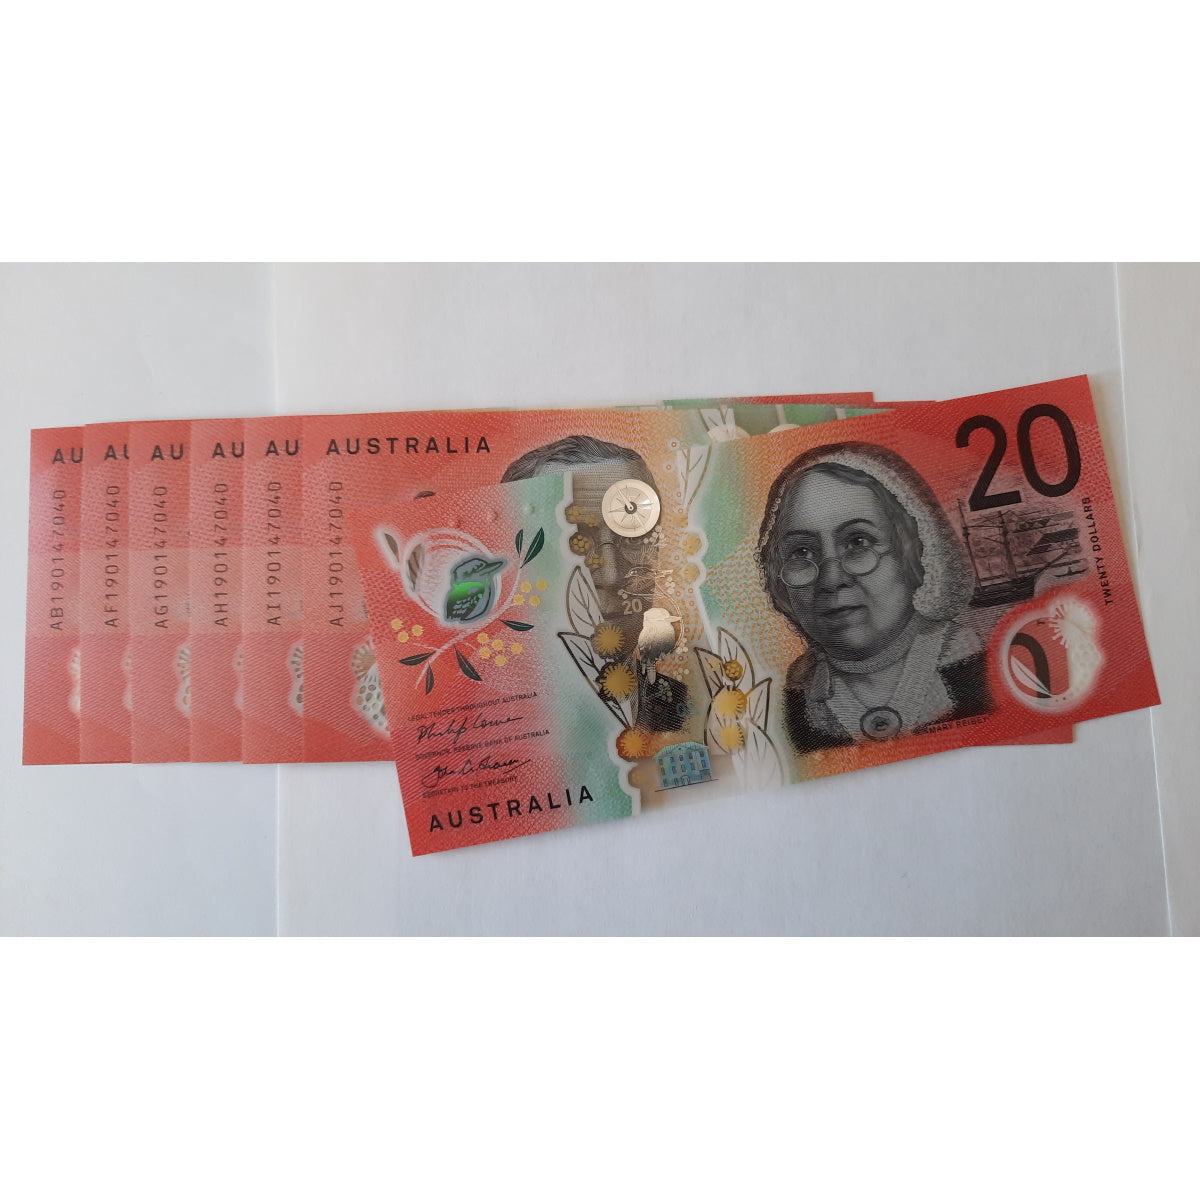 2019 $20 Lowe/Fraser Bank Note General Prefix UNC Matching Serial Number